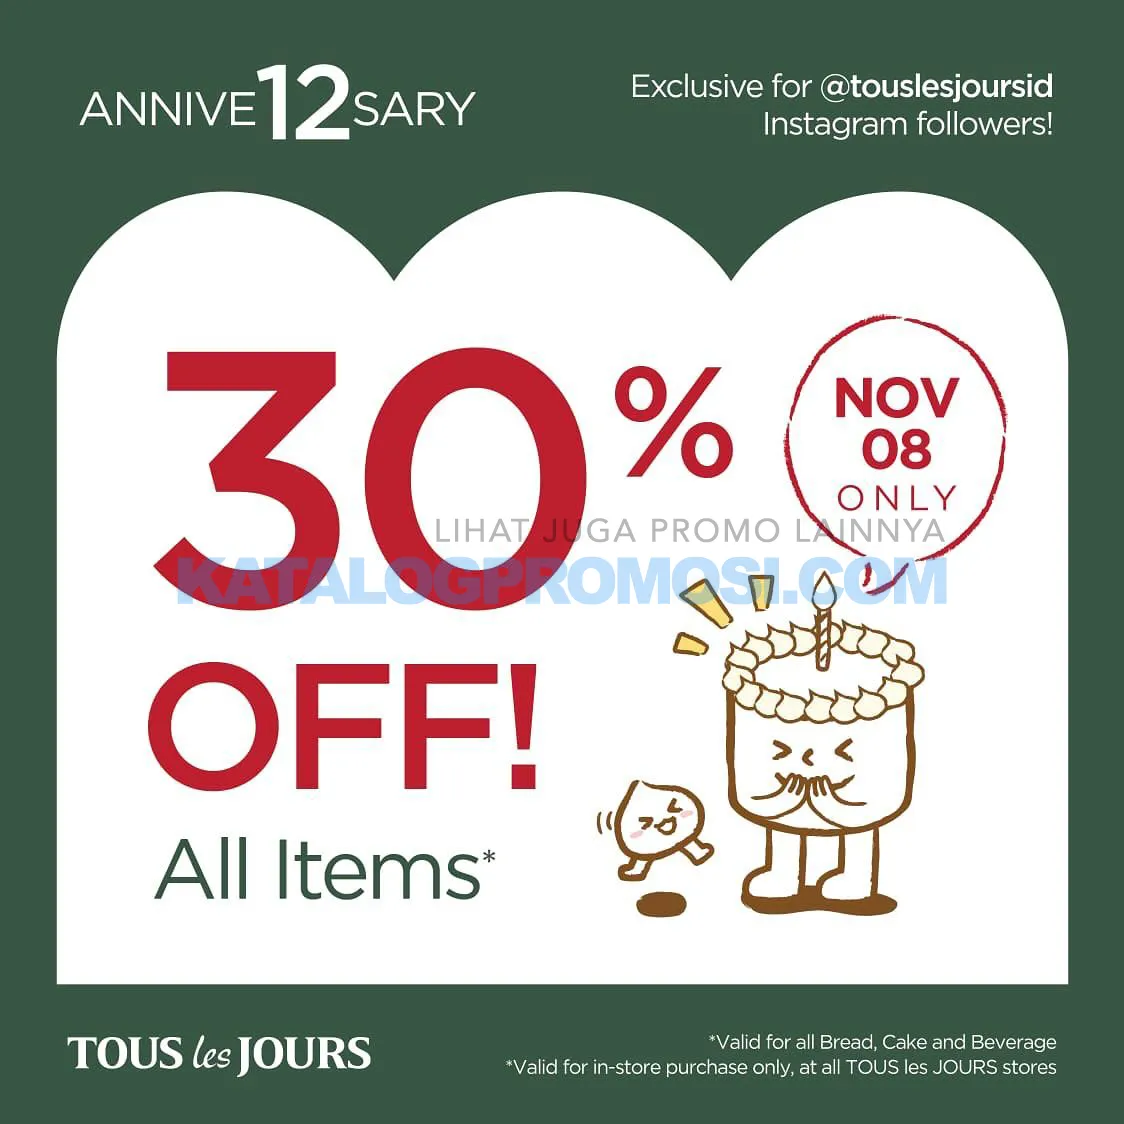 Promo Tous Les Jours 12th anniversary - Discount 30% off all items